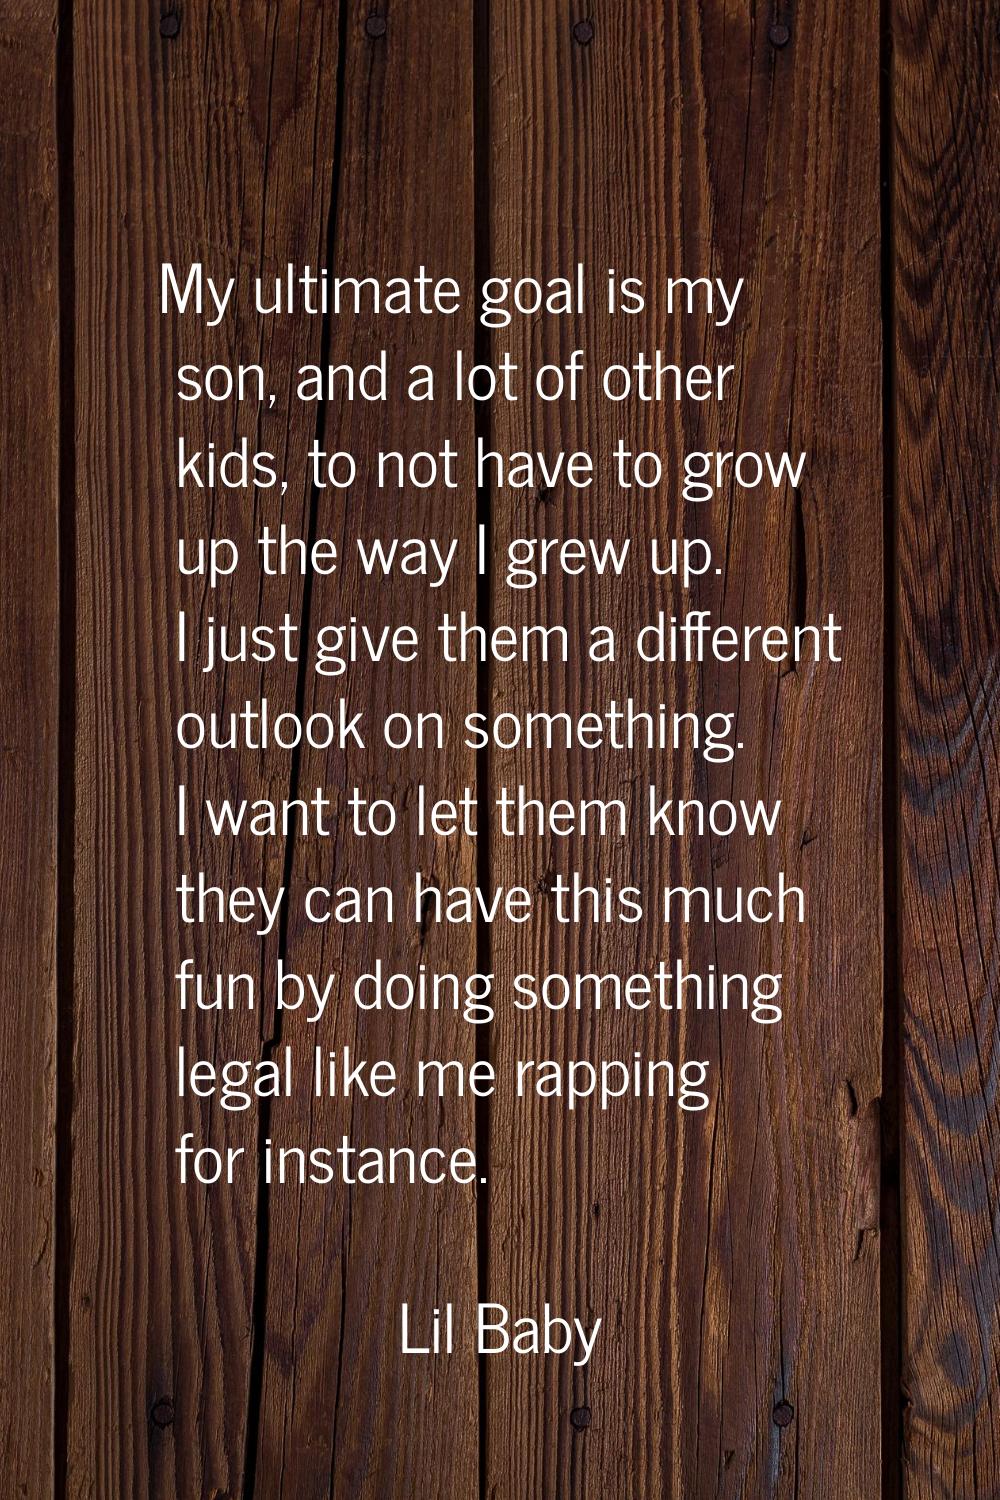 My ultimate goal is my son, and a lot of other kids, to not have to grow up the way I grew up. I ju